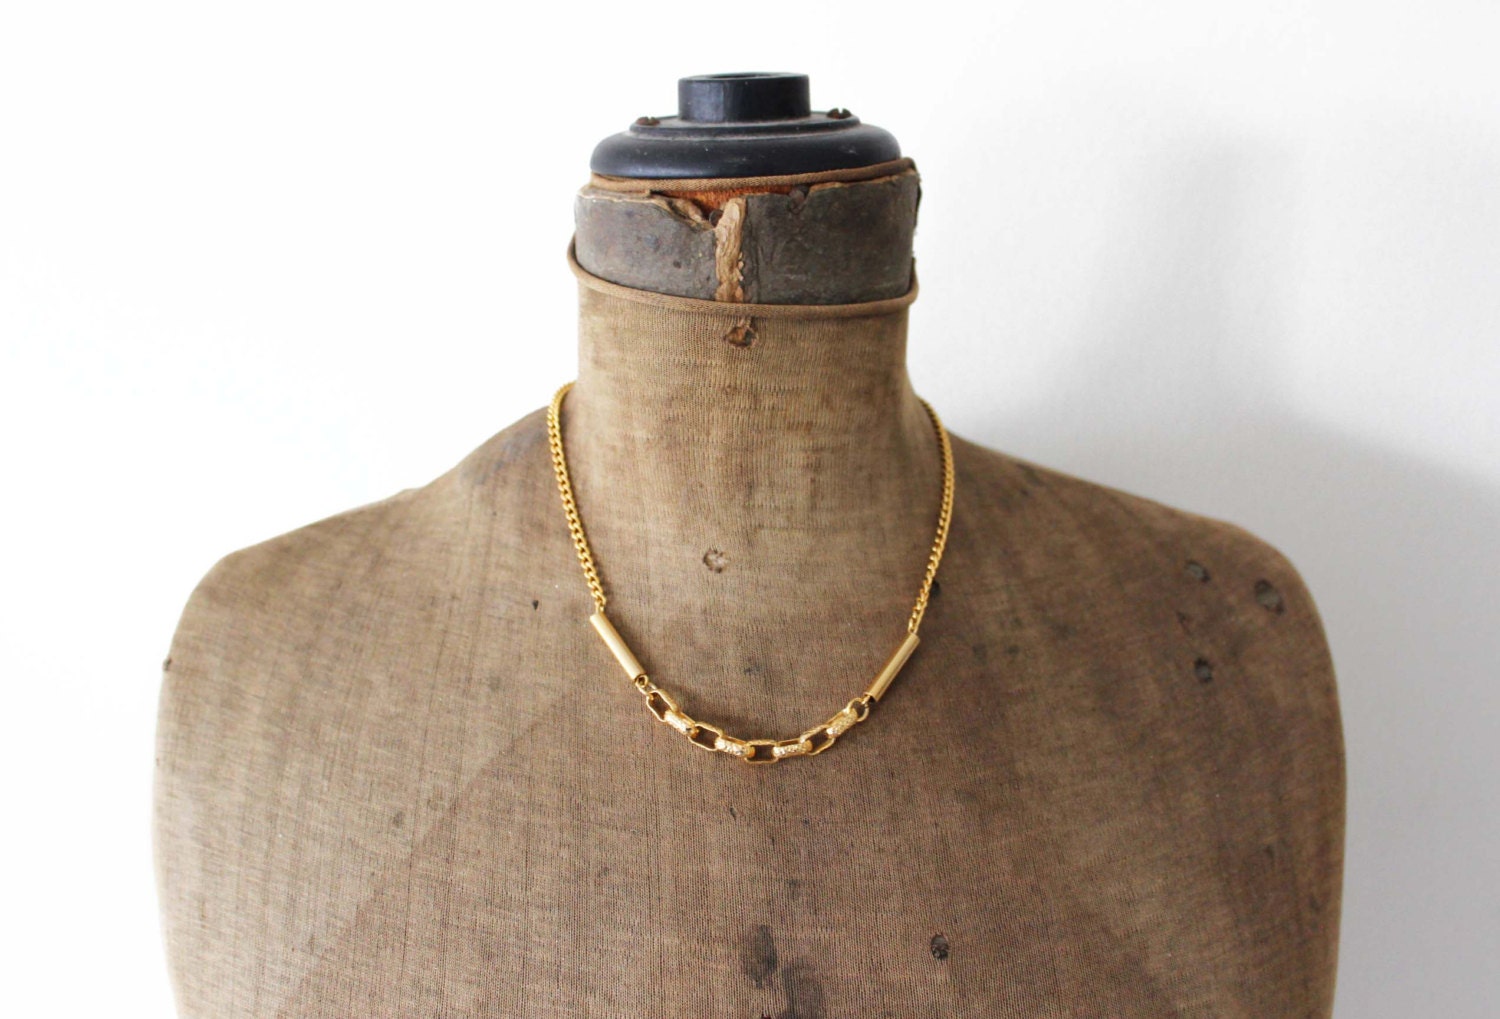 gold chain necklace on Etsy, a global handmade and vintage marketplace.